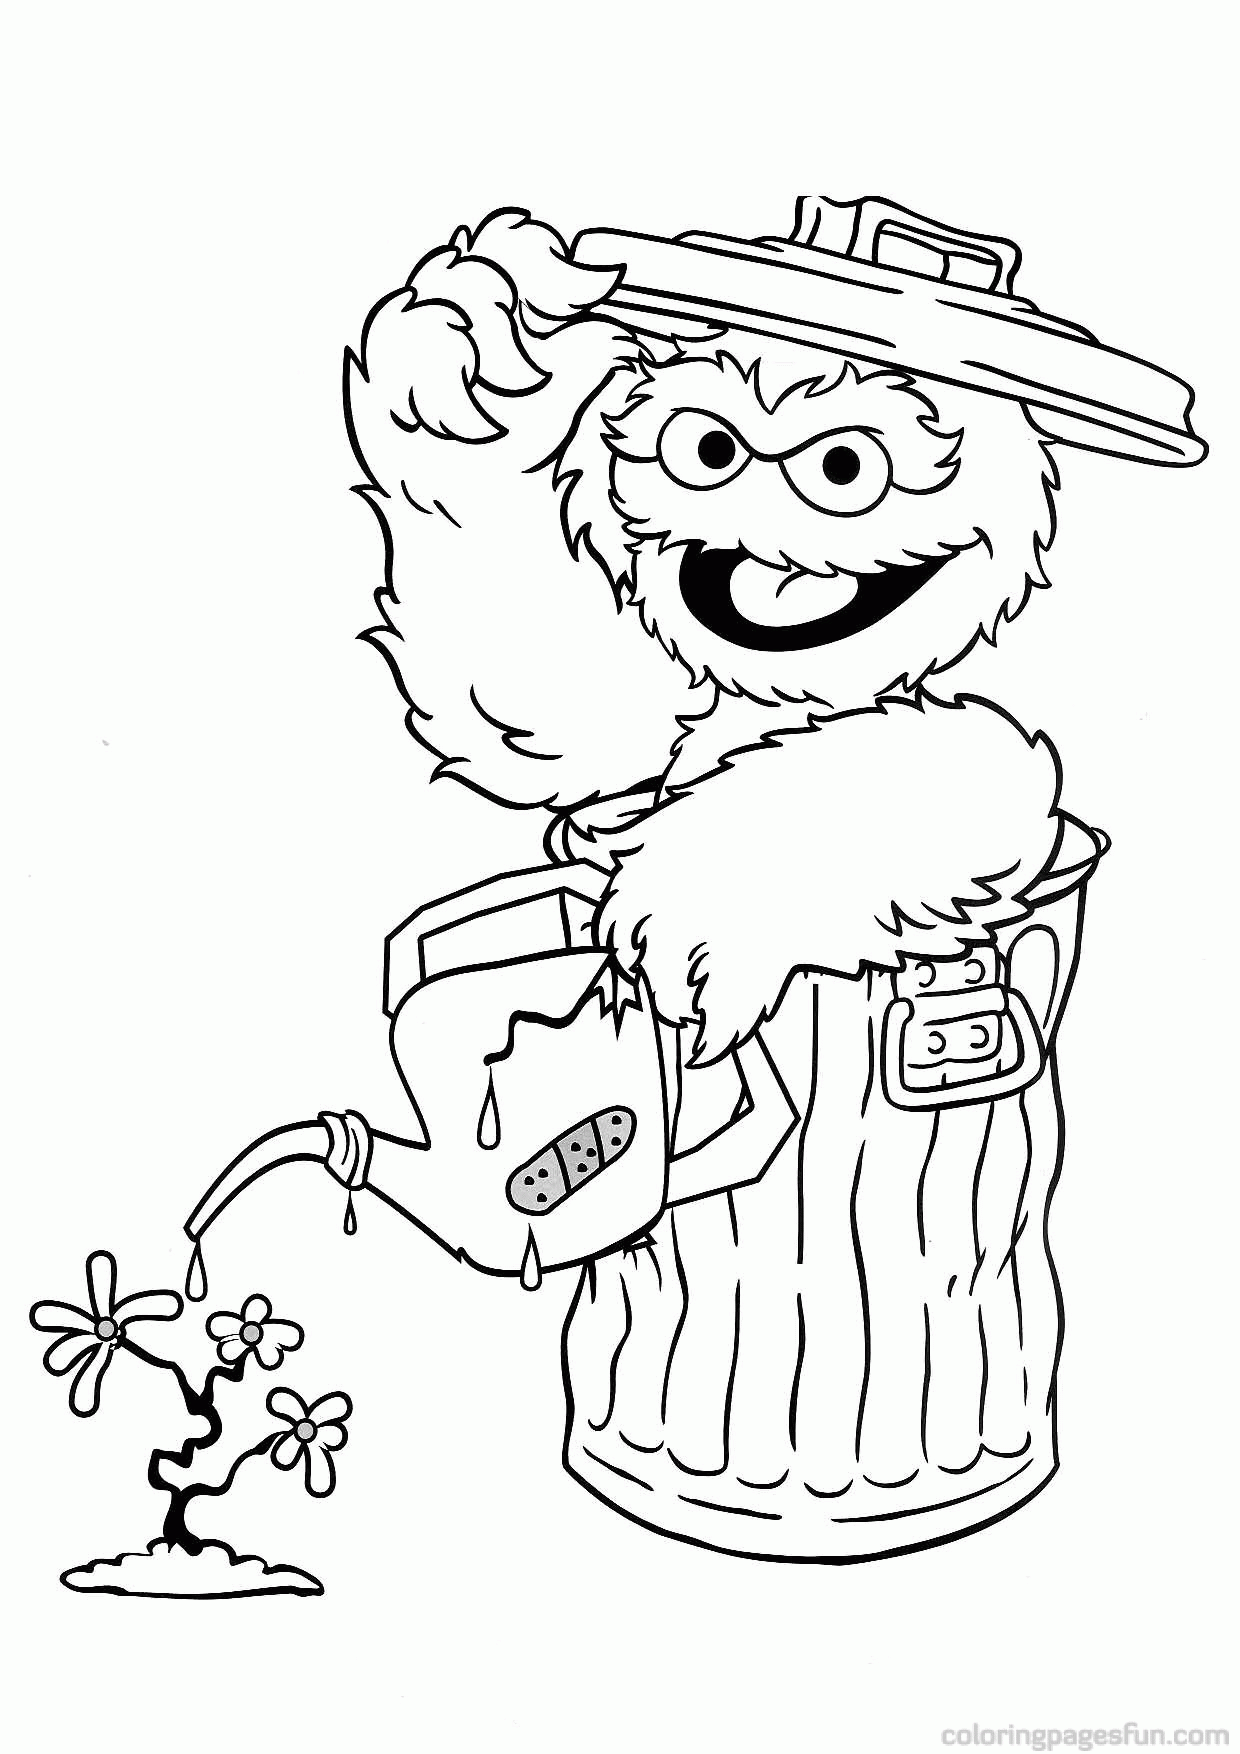 sesame street birthday coloring pages. zoe sesame street coloring ...